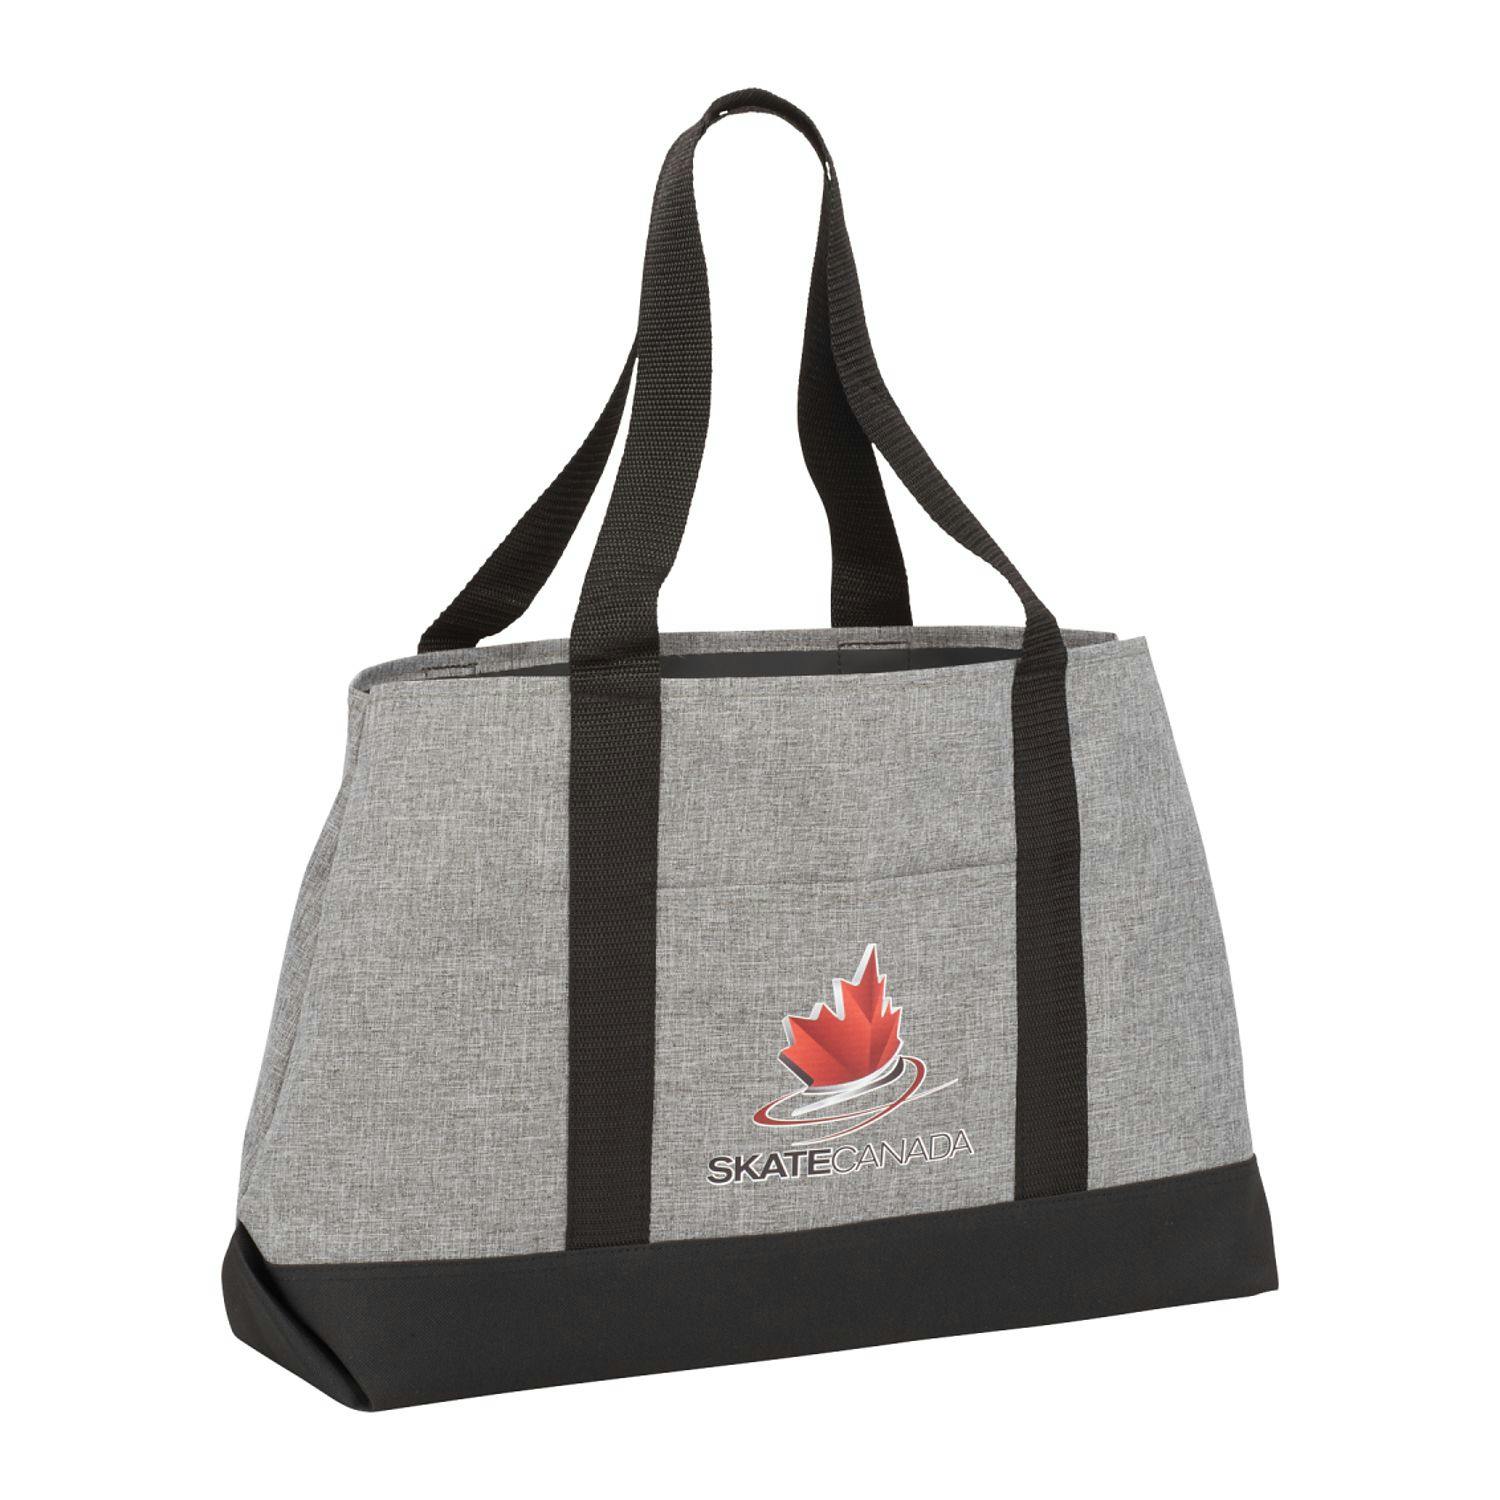 Excel Sport Leisure Boat Tote - additional Image 1